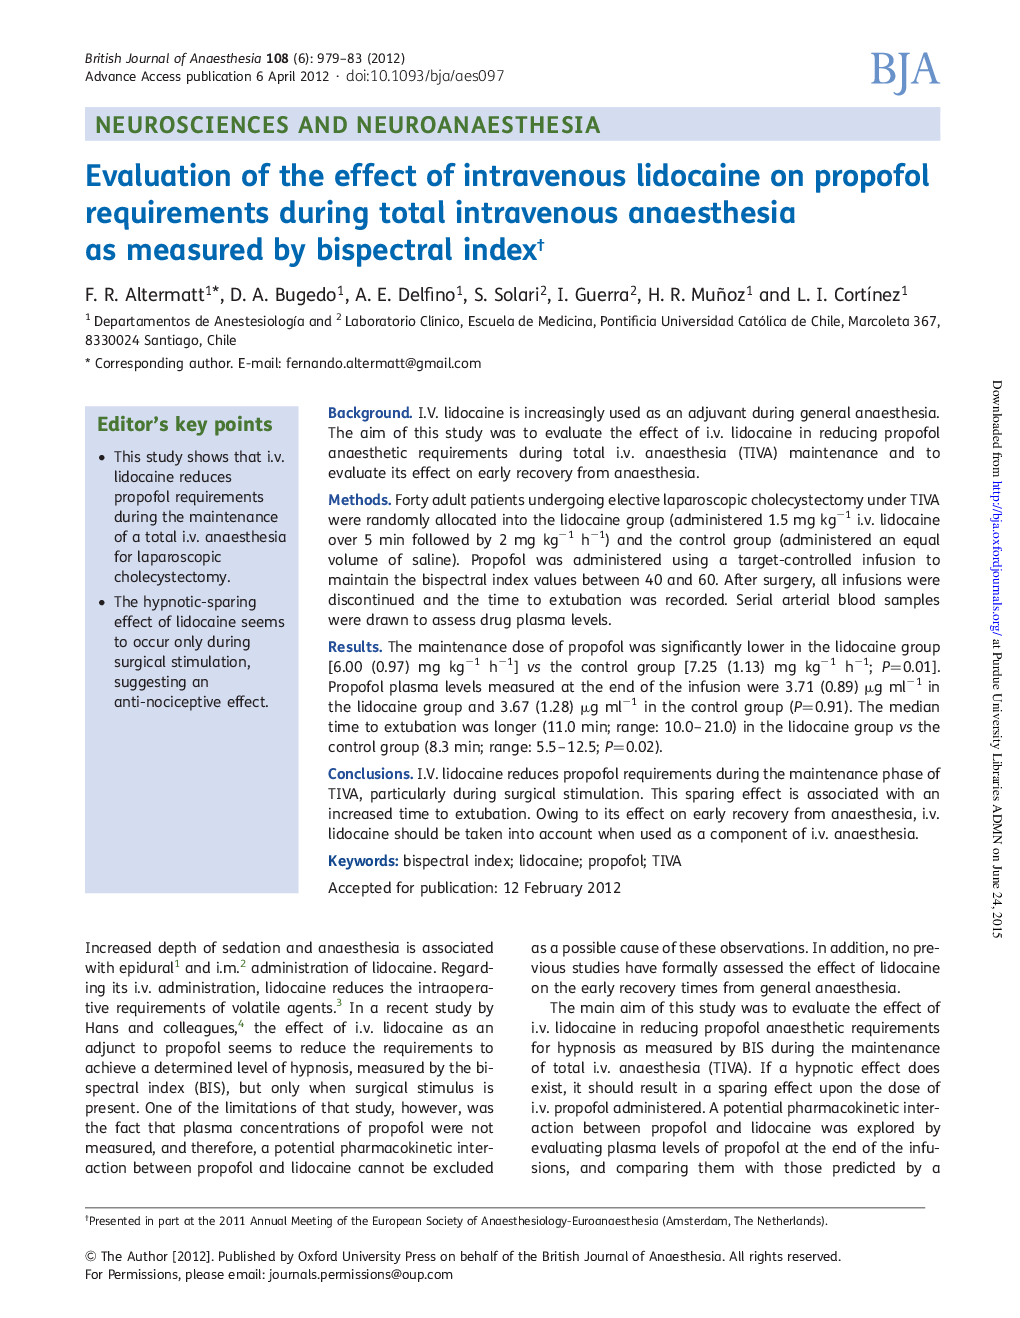 Evaluation of the effect of intravenous lidocaine on propofol requirements during total intravenous anaesthesia as measured by bispectral indexâ 